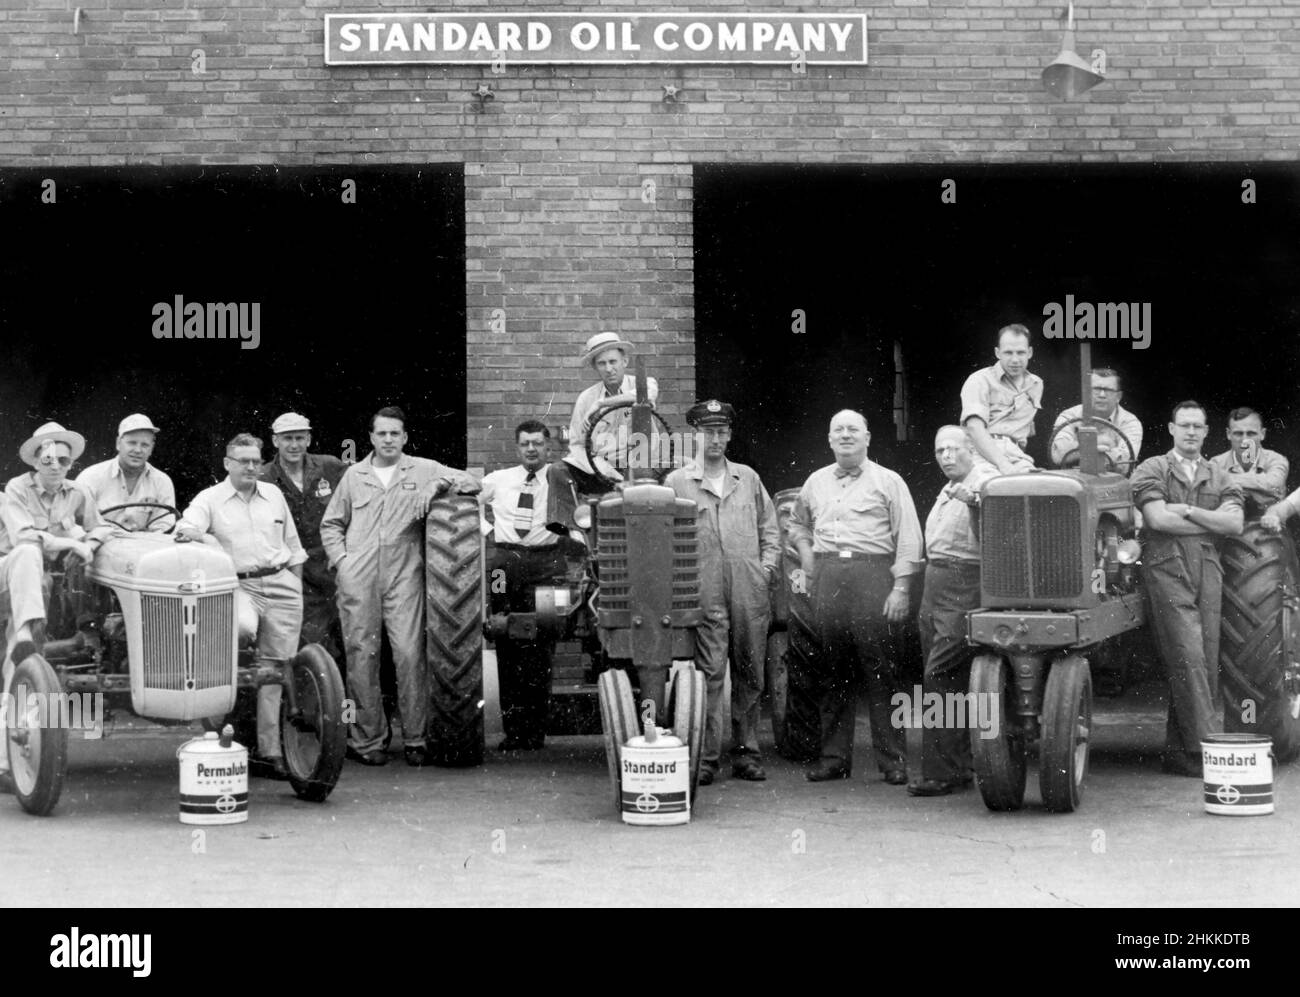 Group shot of farmers and Standard Oil workers pose, ca. 1935. Stock Photo